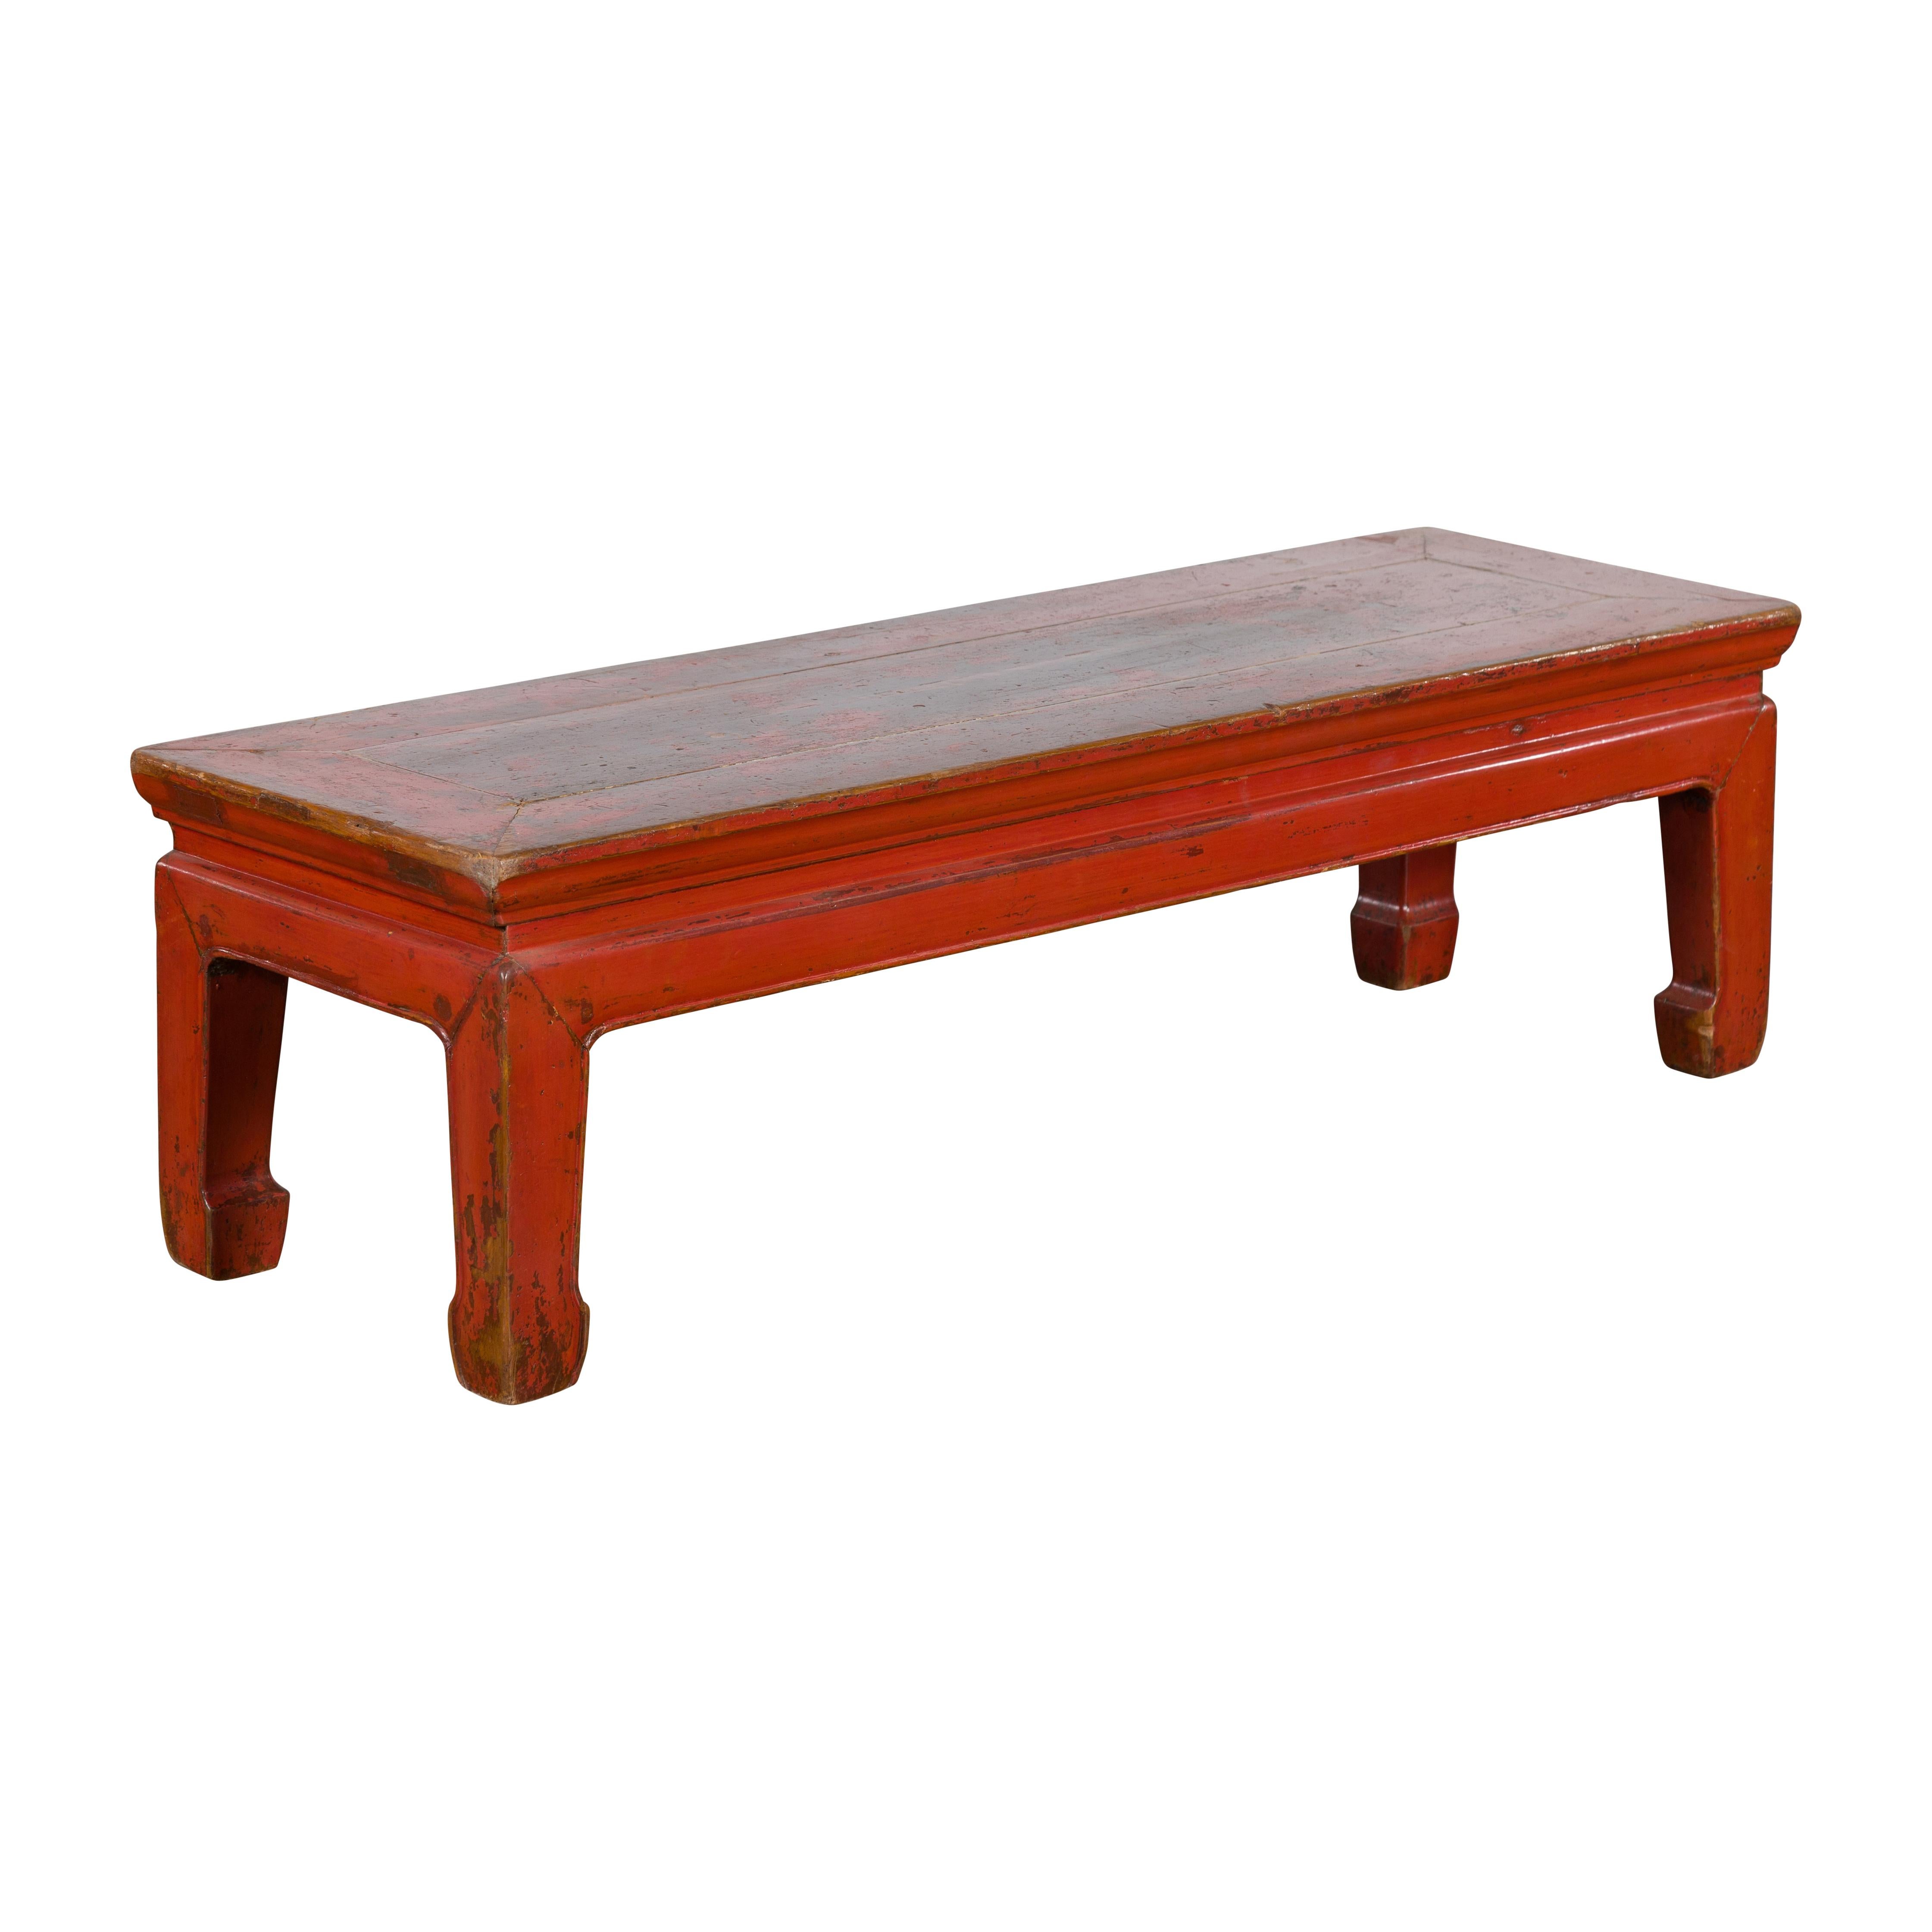 A Chinese Ming Dynasty style red lacquered low table from the early 20th century, with distressed finish and horse hoof legs. Created in China during the early years of the 20th century, this low Ming style table features a rectangular waisted top